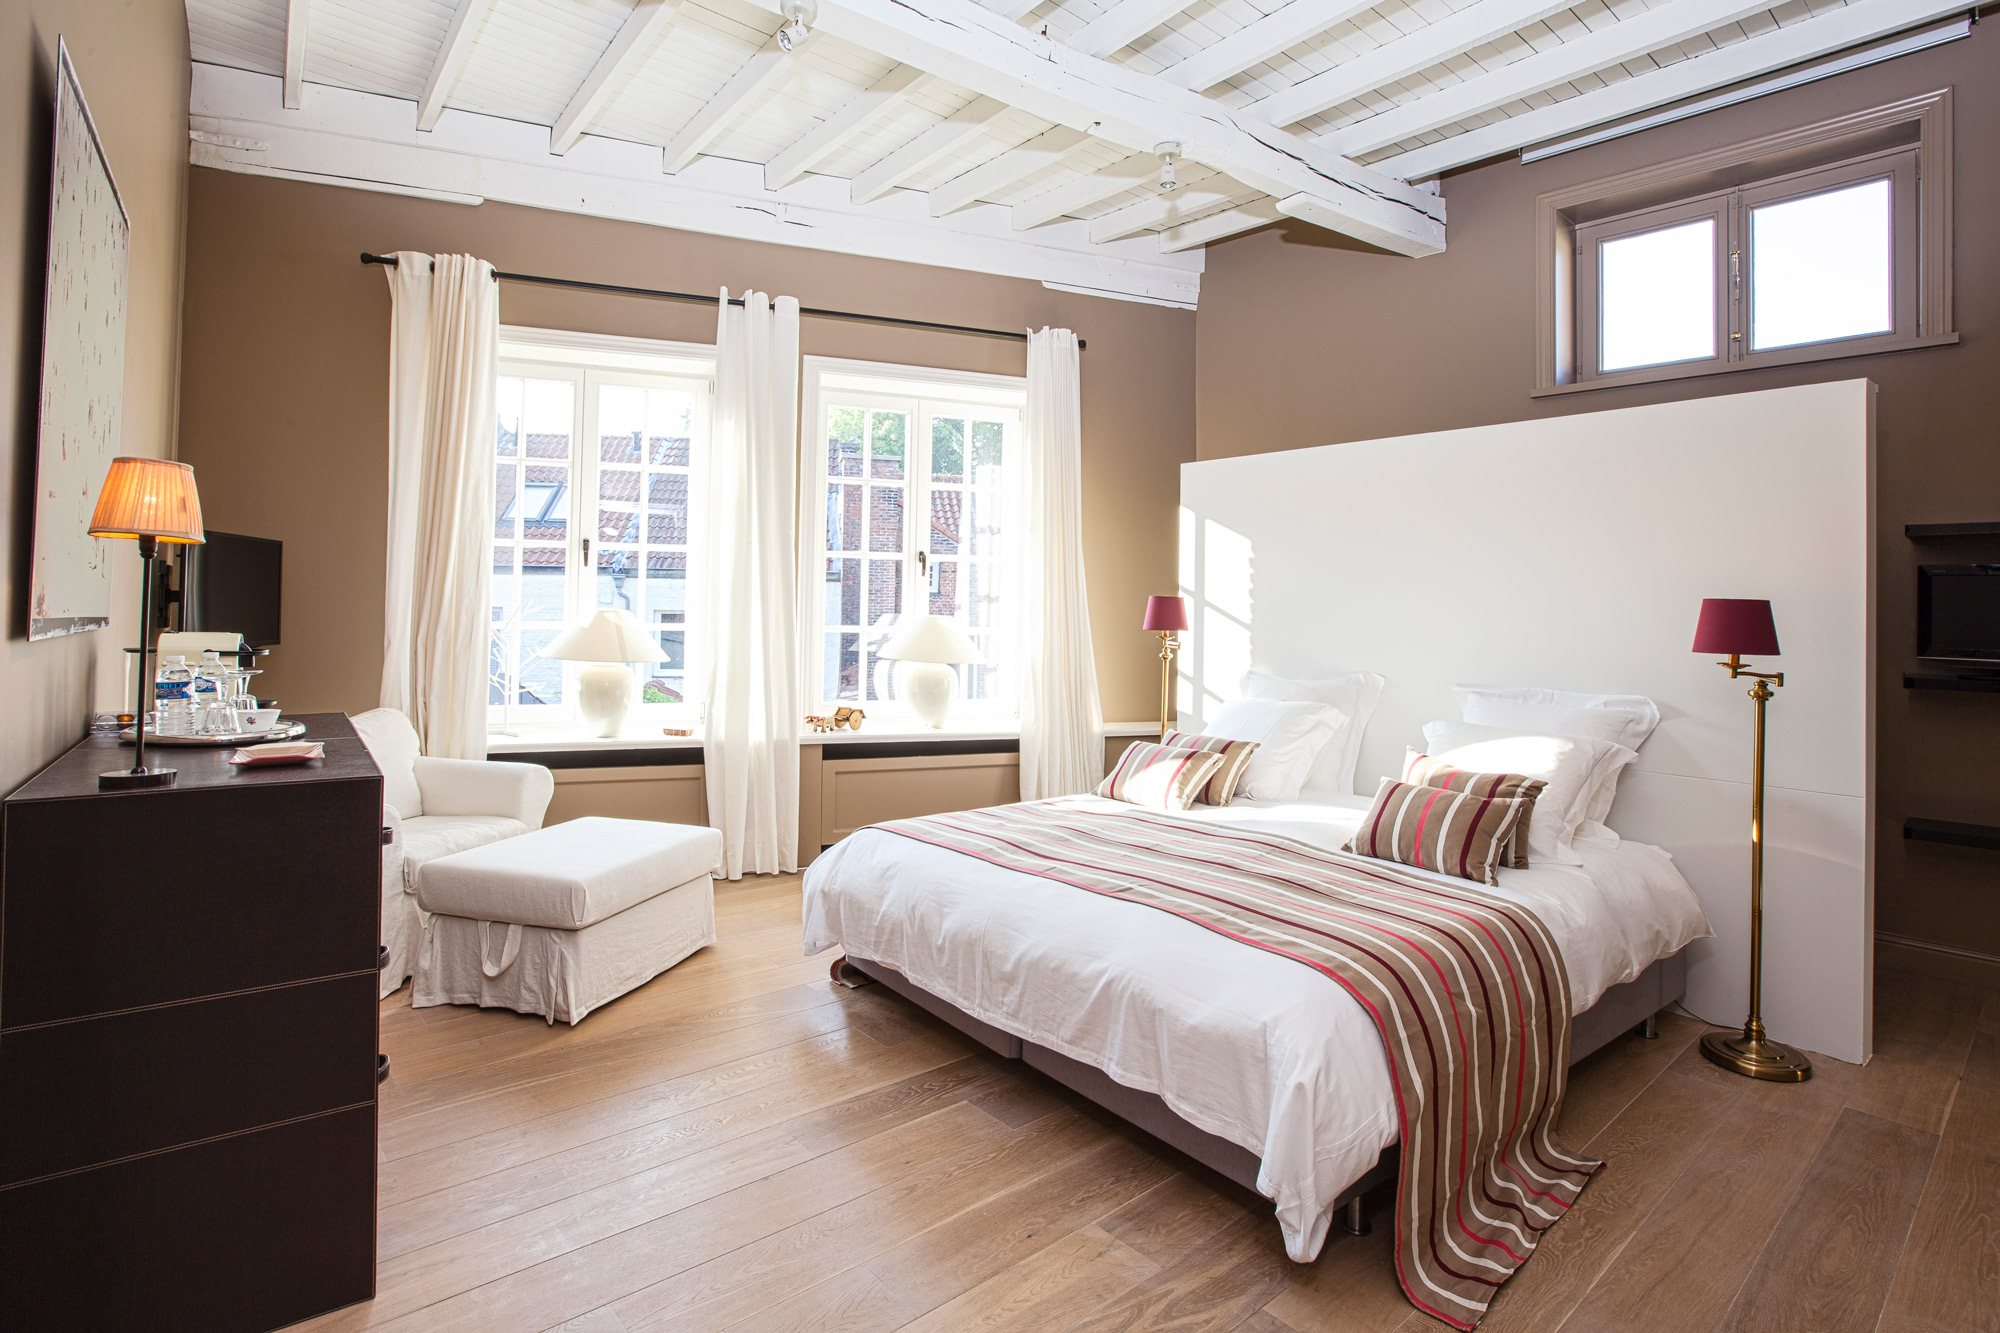 Maison Amodio is a stylishly decorated bed and breakfast in the centre of Bruges where you can have a perfect stay. This is the Biarritz-room.